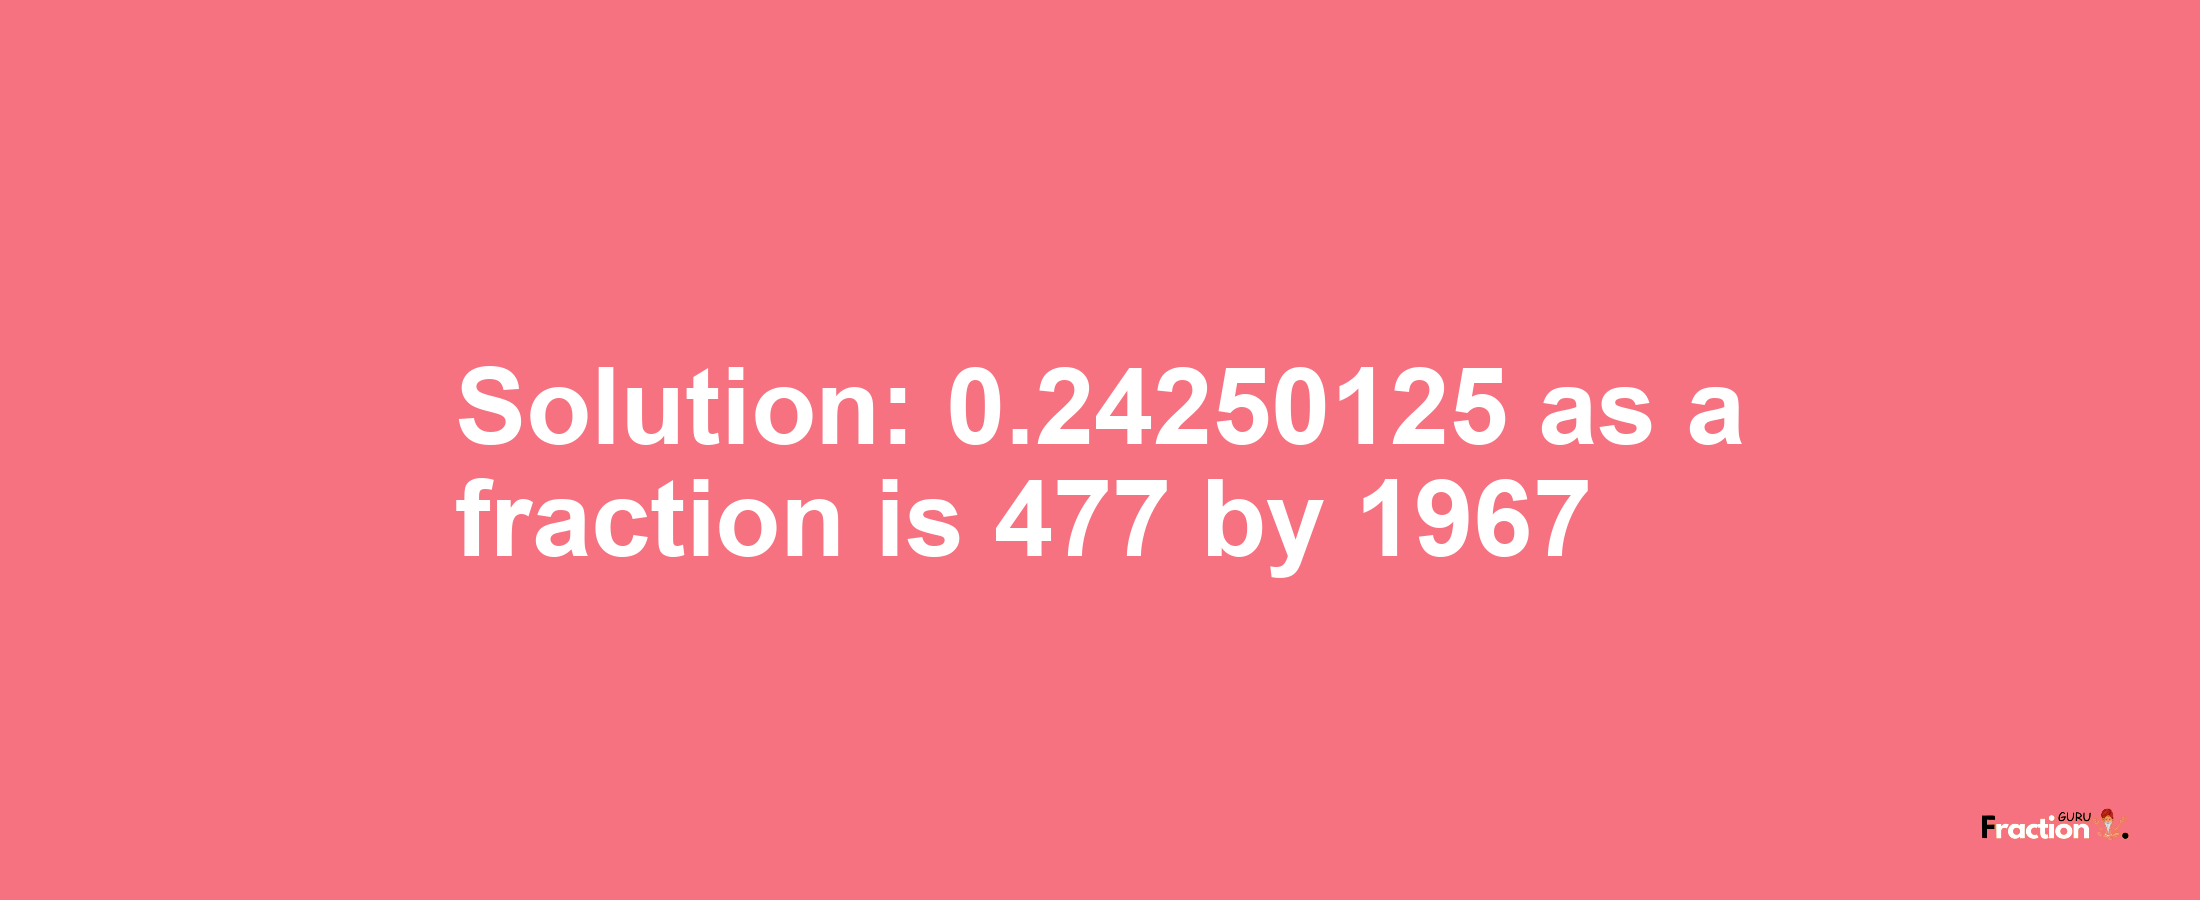 Solution:0.24250125 as a fraction is 477/1967